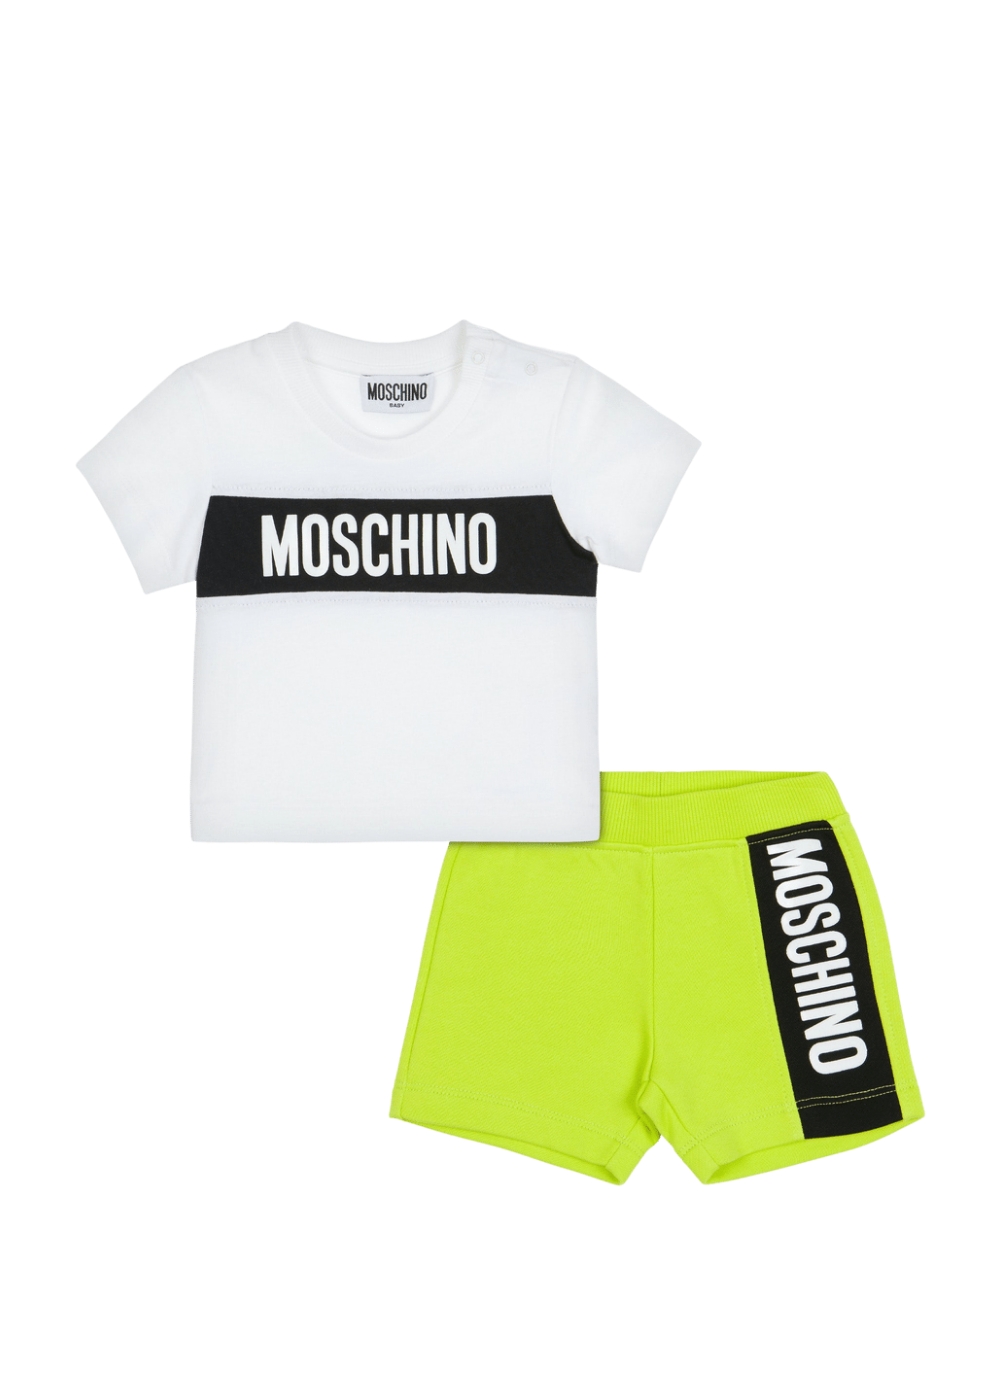 Featured image for “Moschino Completo Bambino”